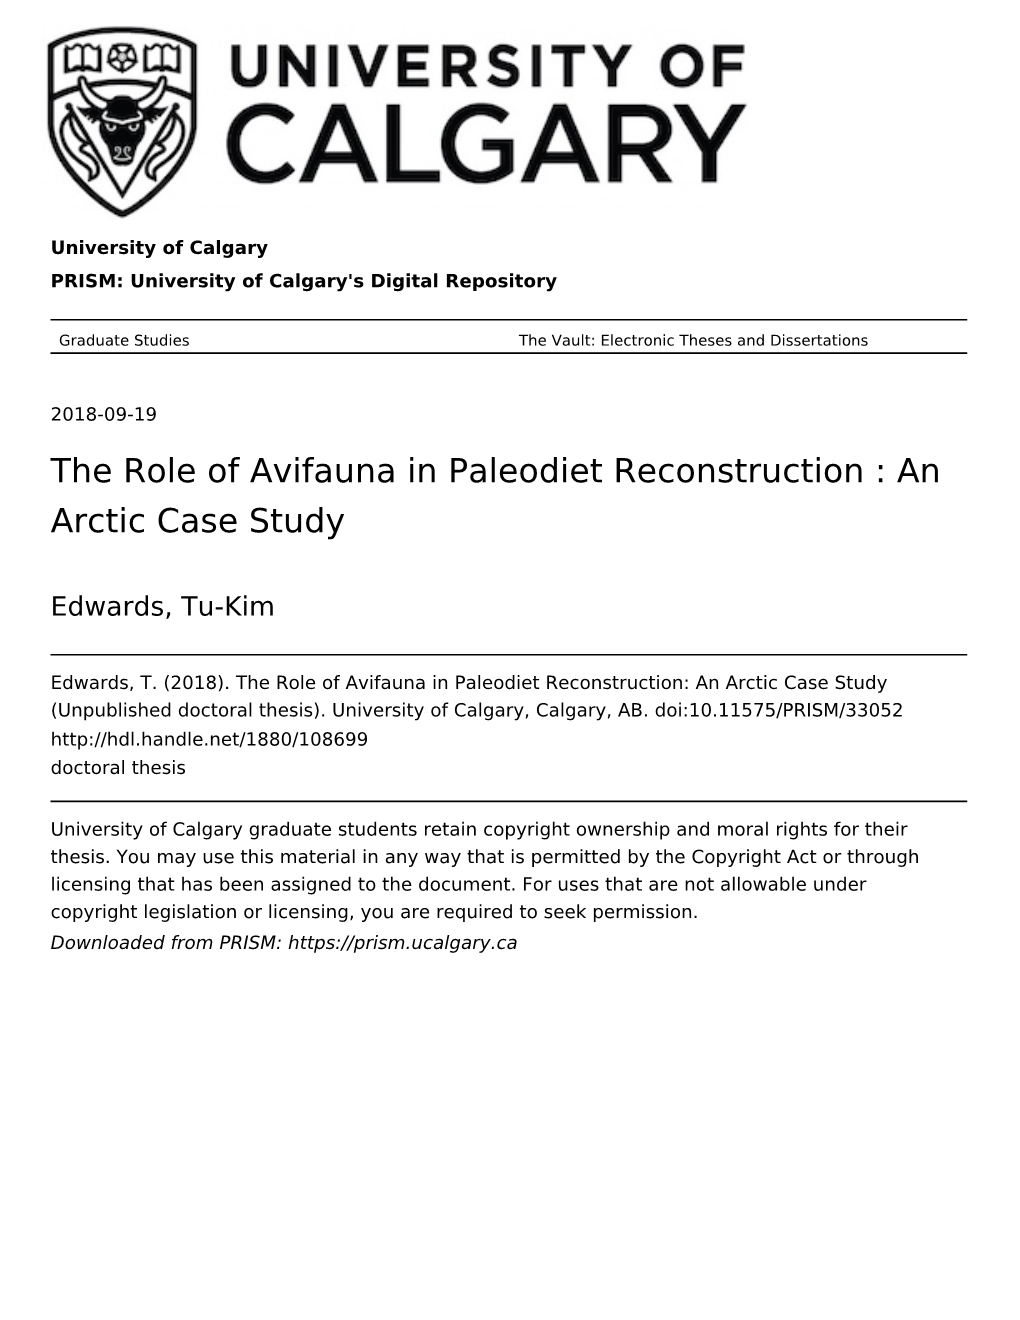 The Role of Avifauna in Paleodiet Reconstruction : an Arctic Case Study